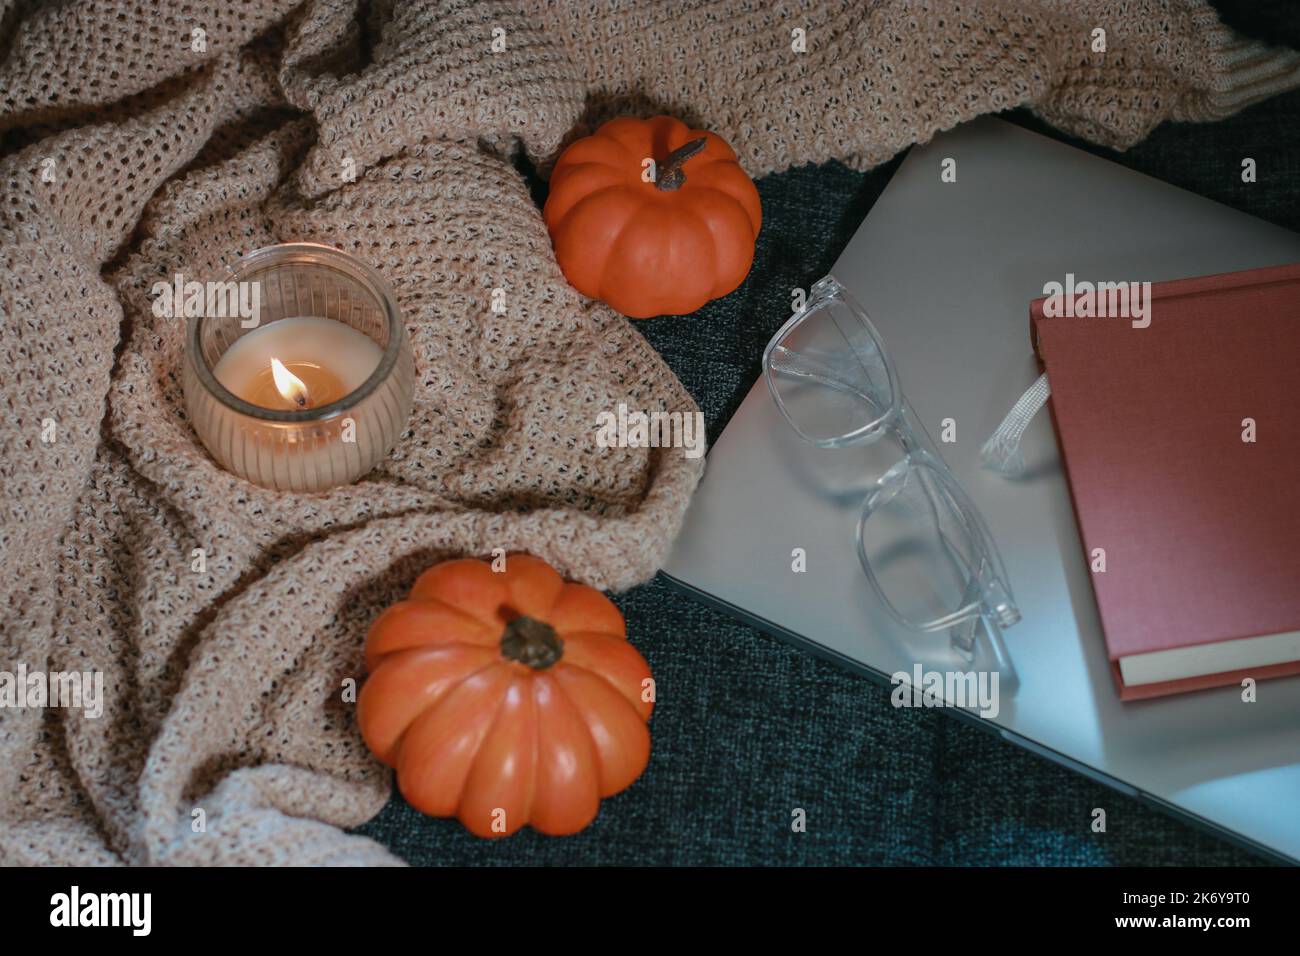 Little pumpkins, cozy knitted blanked, notebook and glasses on sofa Stock Photo